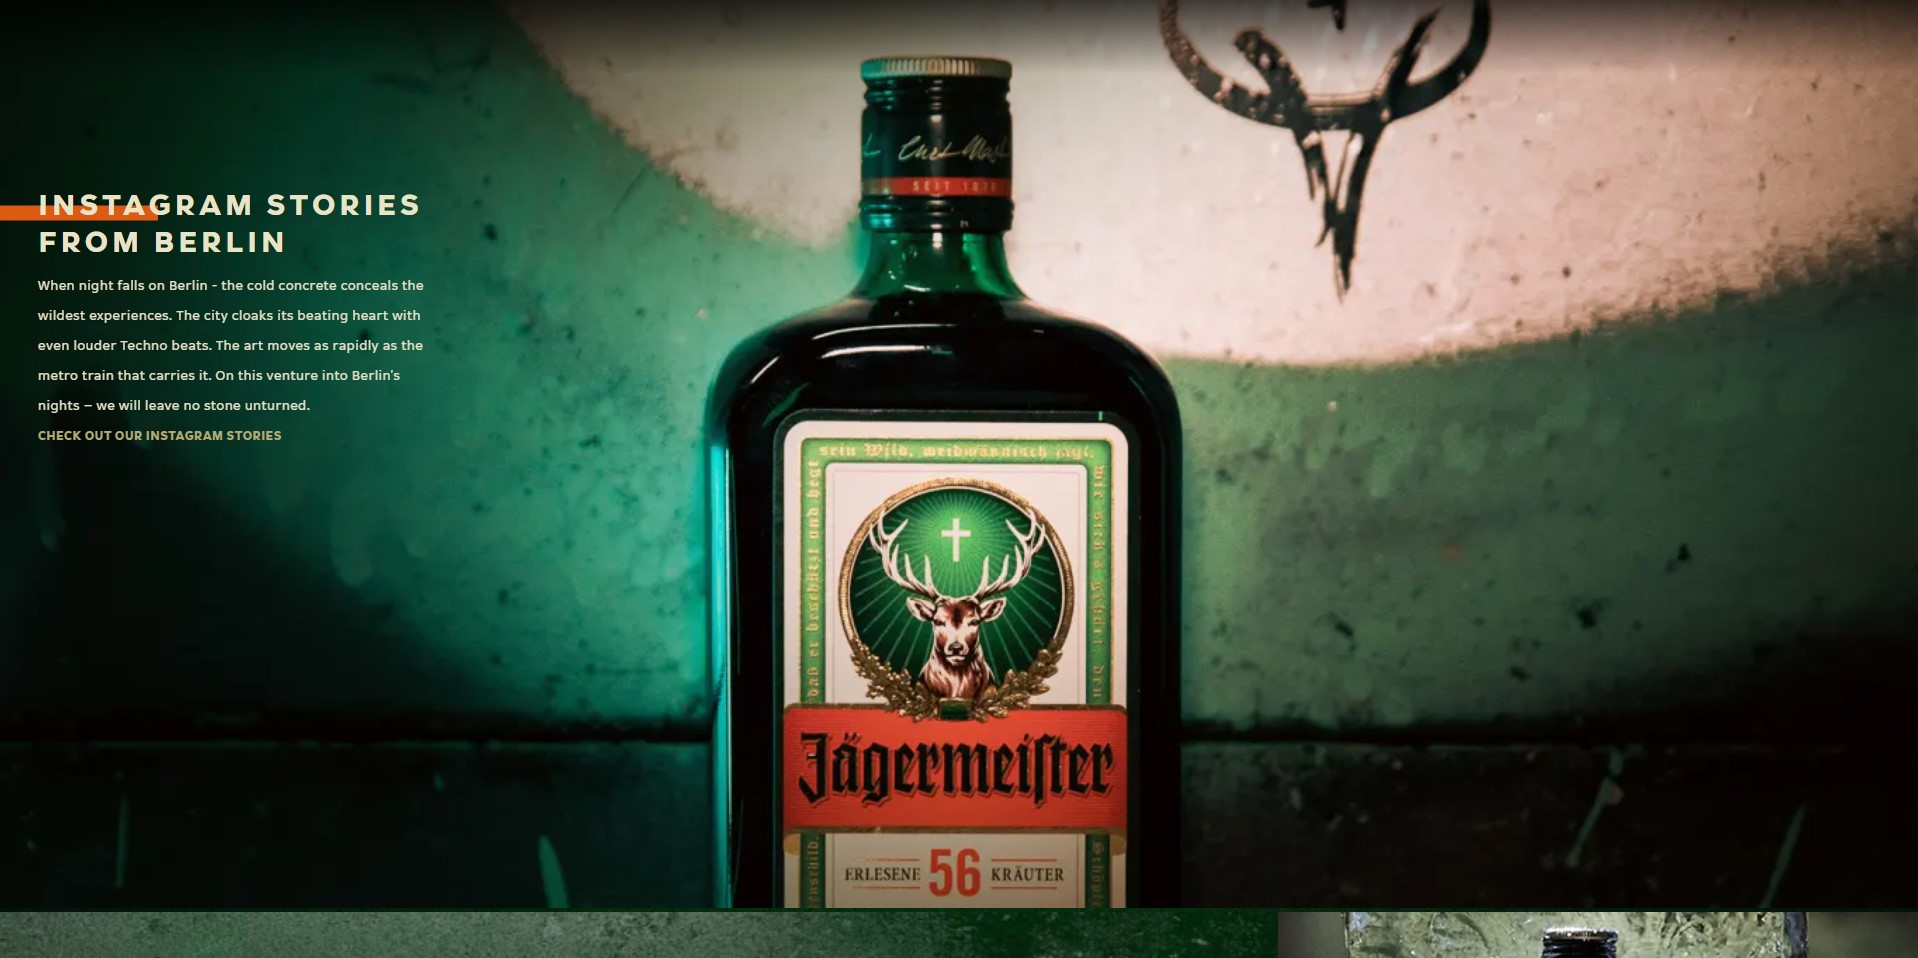 Jagermeister main page